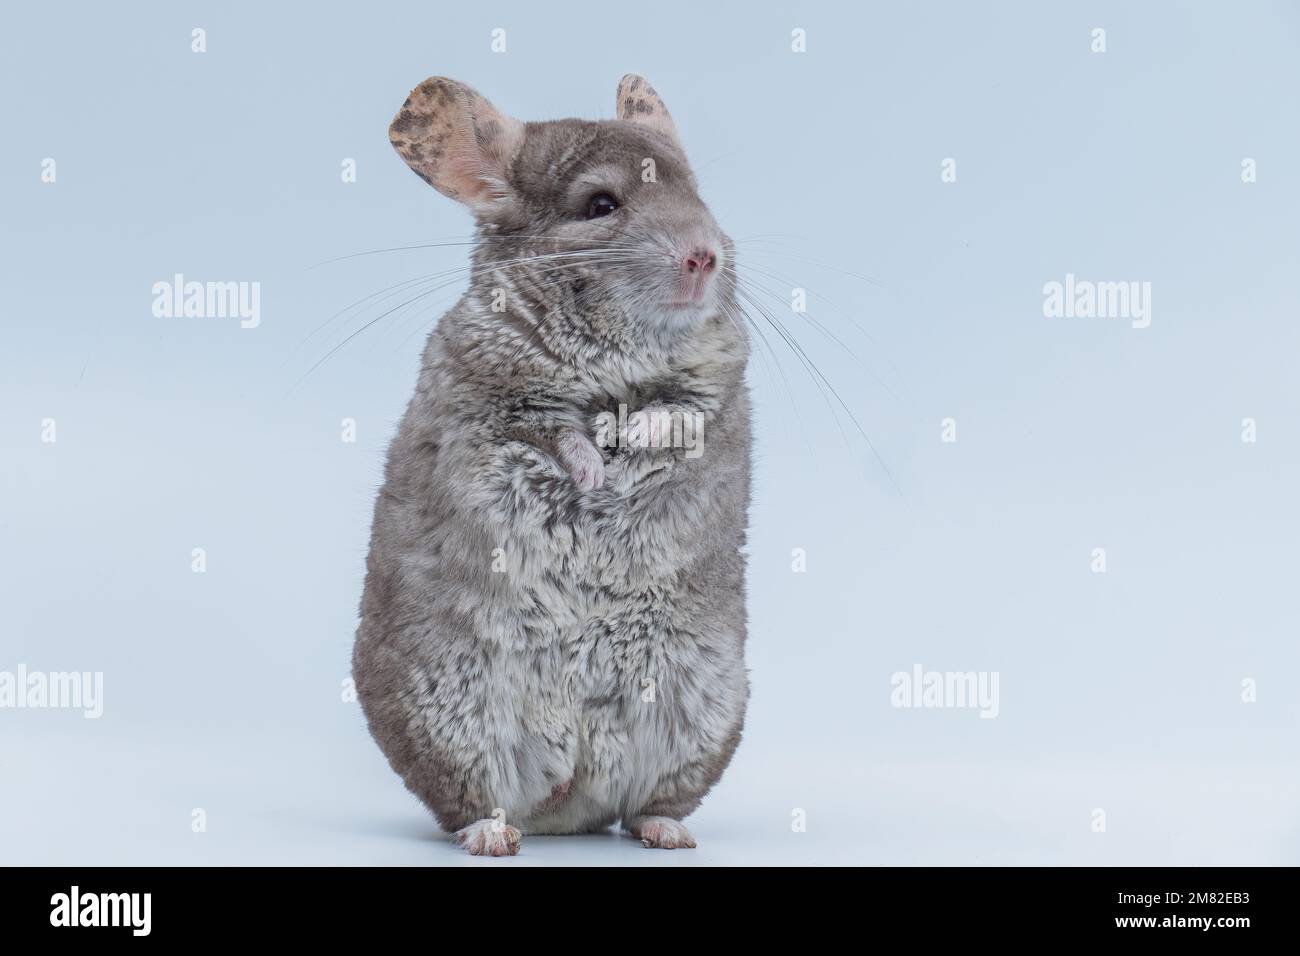 Chinchilla stands on its hind legs isolated on a white background. Home pet rodent animal. Stock Photo